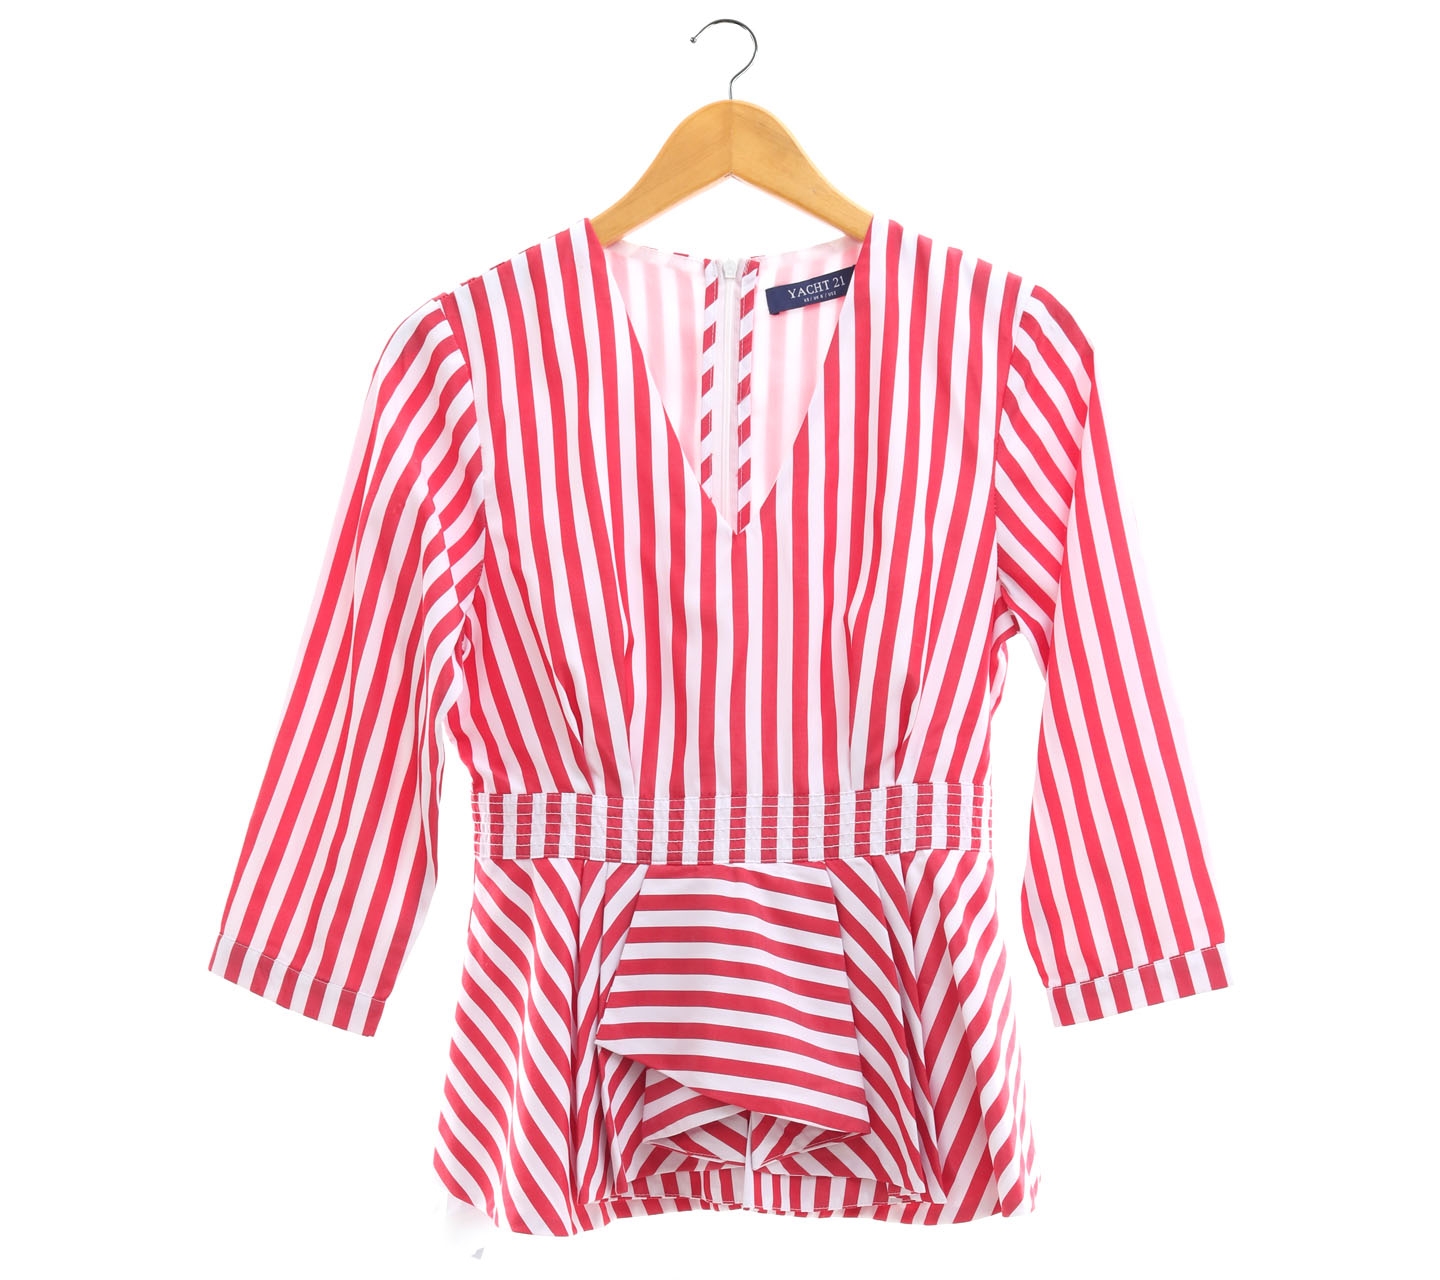 Yacht 21 White & Red Striped Blouse